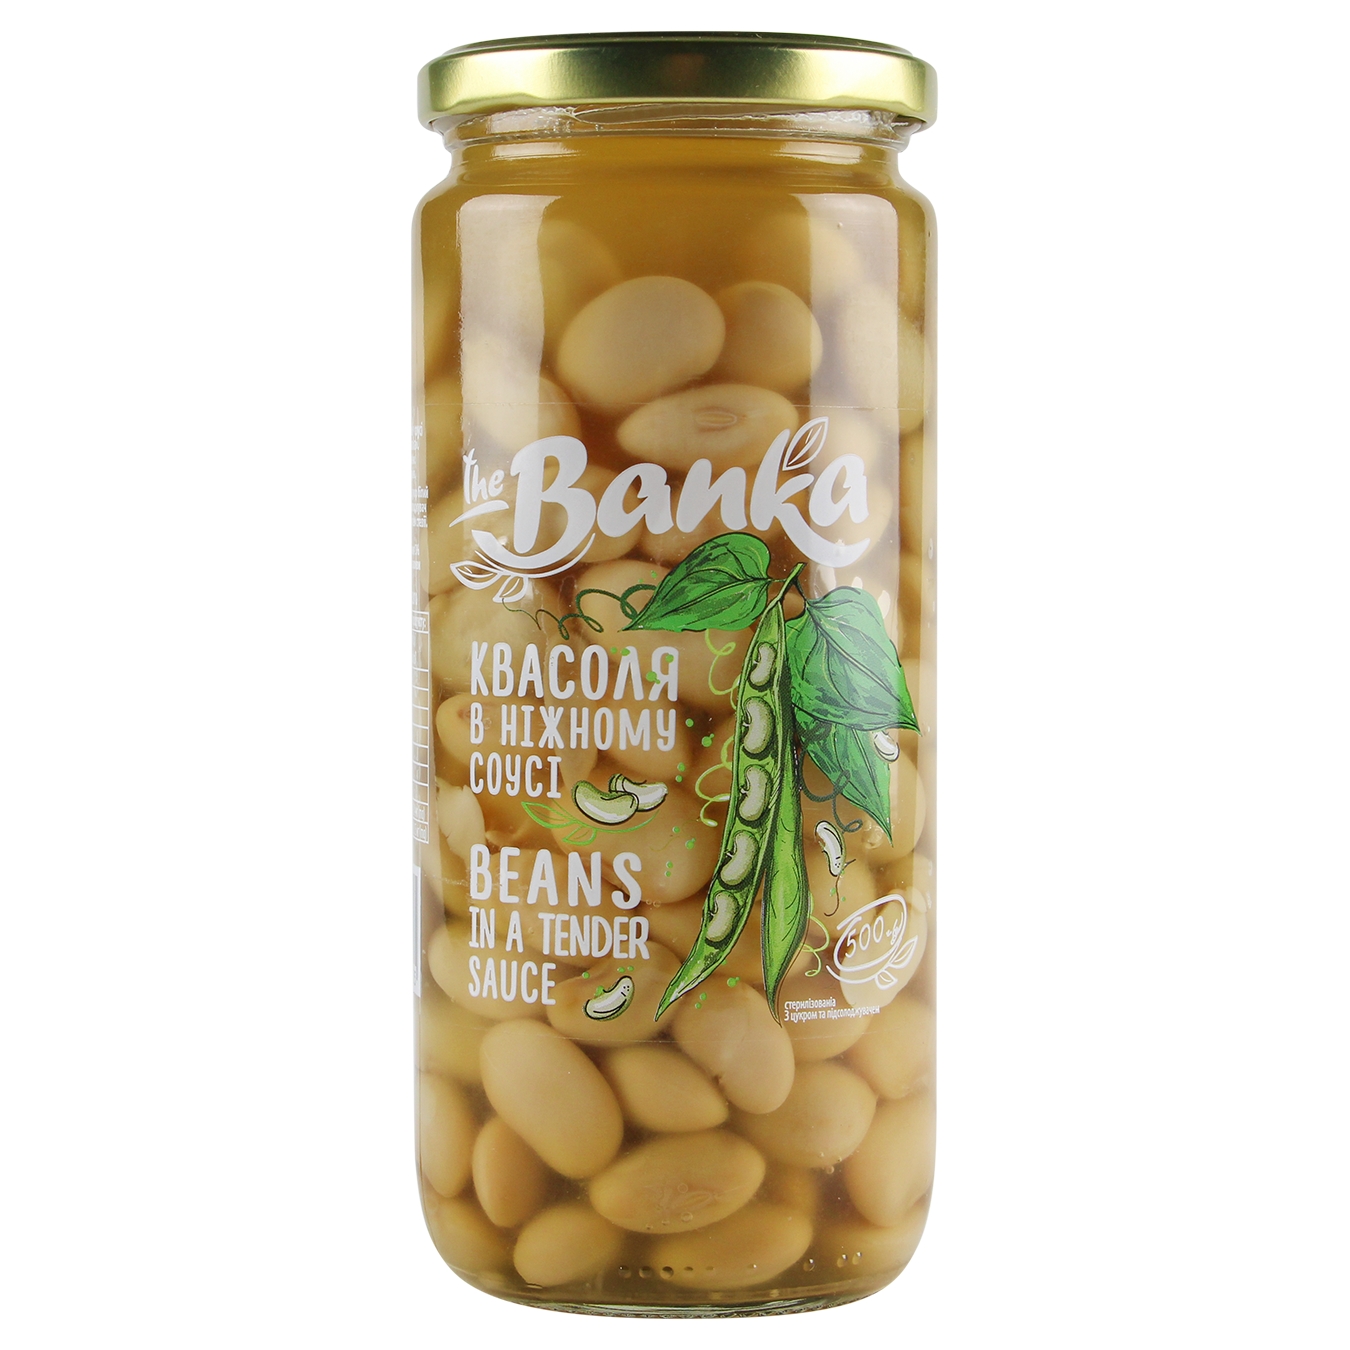 The Banka beans in a gentle sauce sterilized 500g